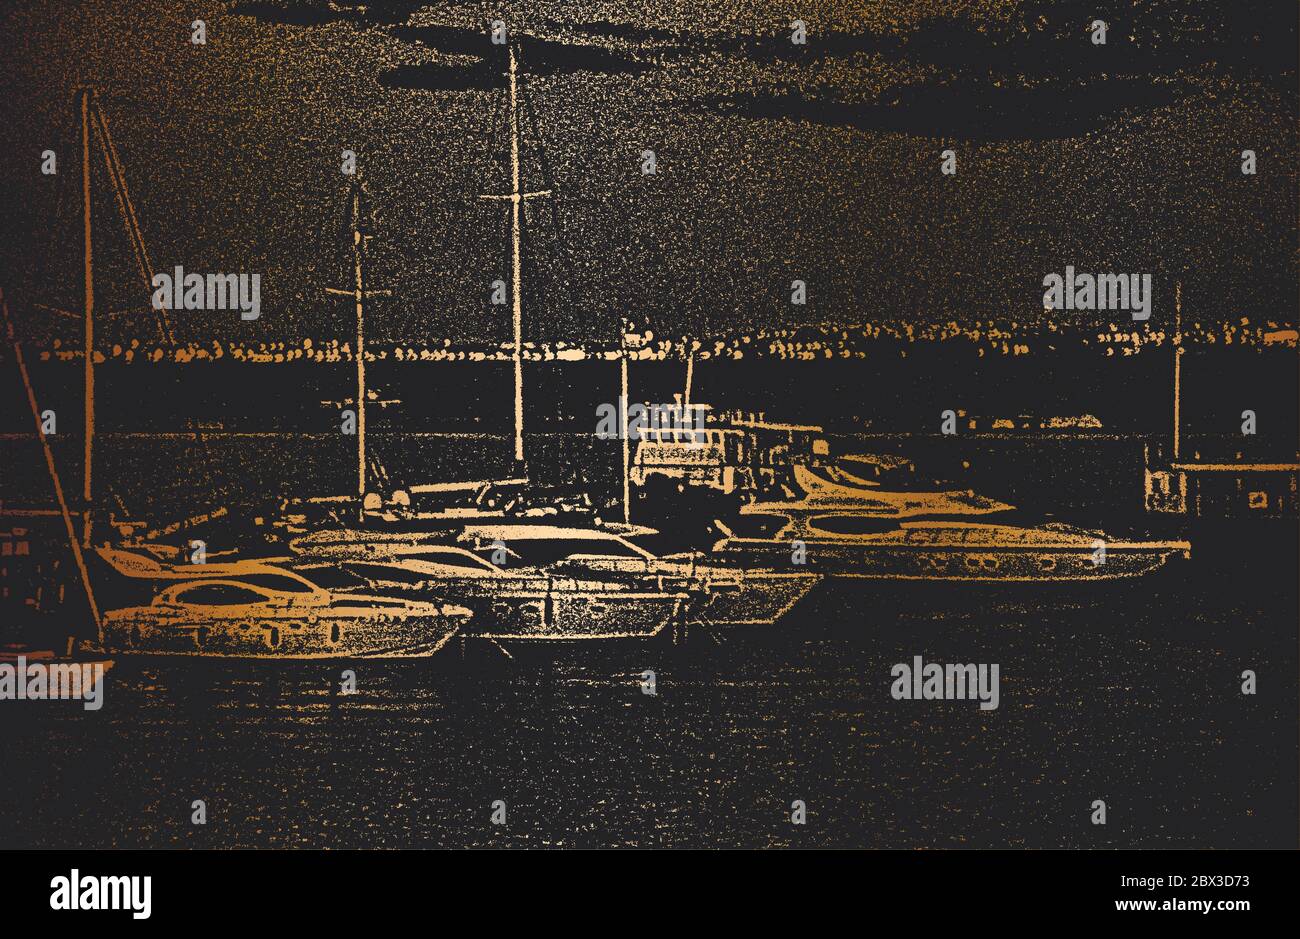 Berth for yachts and boats in the seaport. The ocean yachts is securely moored at the pier of the passenger terminal of the port. Vintage hand drawn v Stock Vector